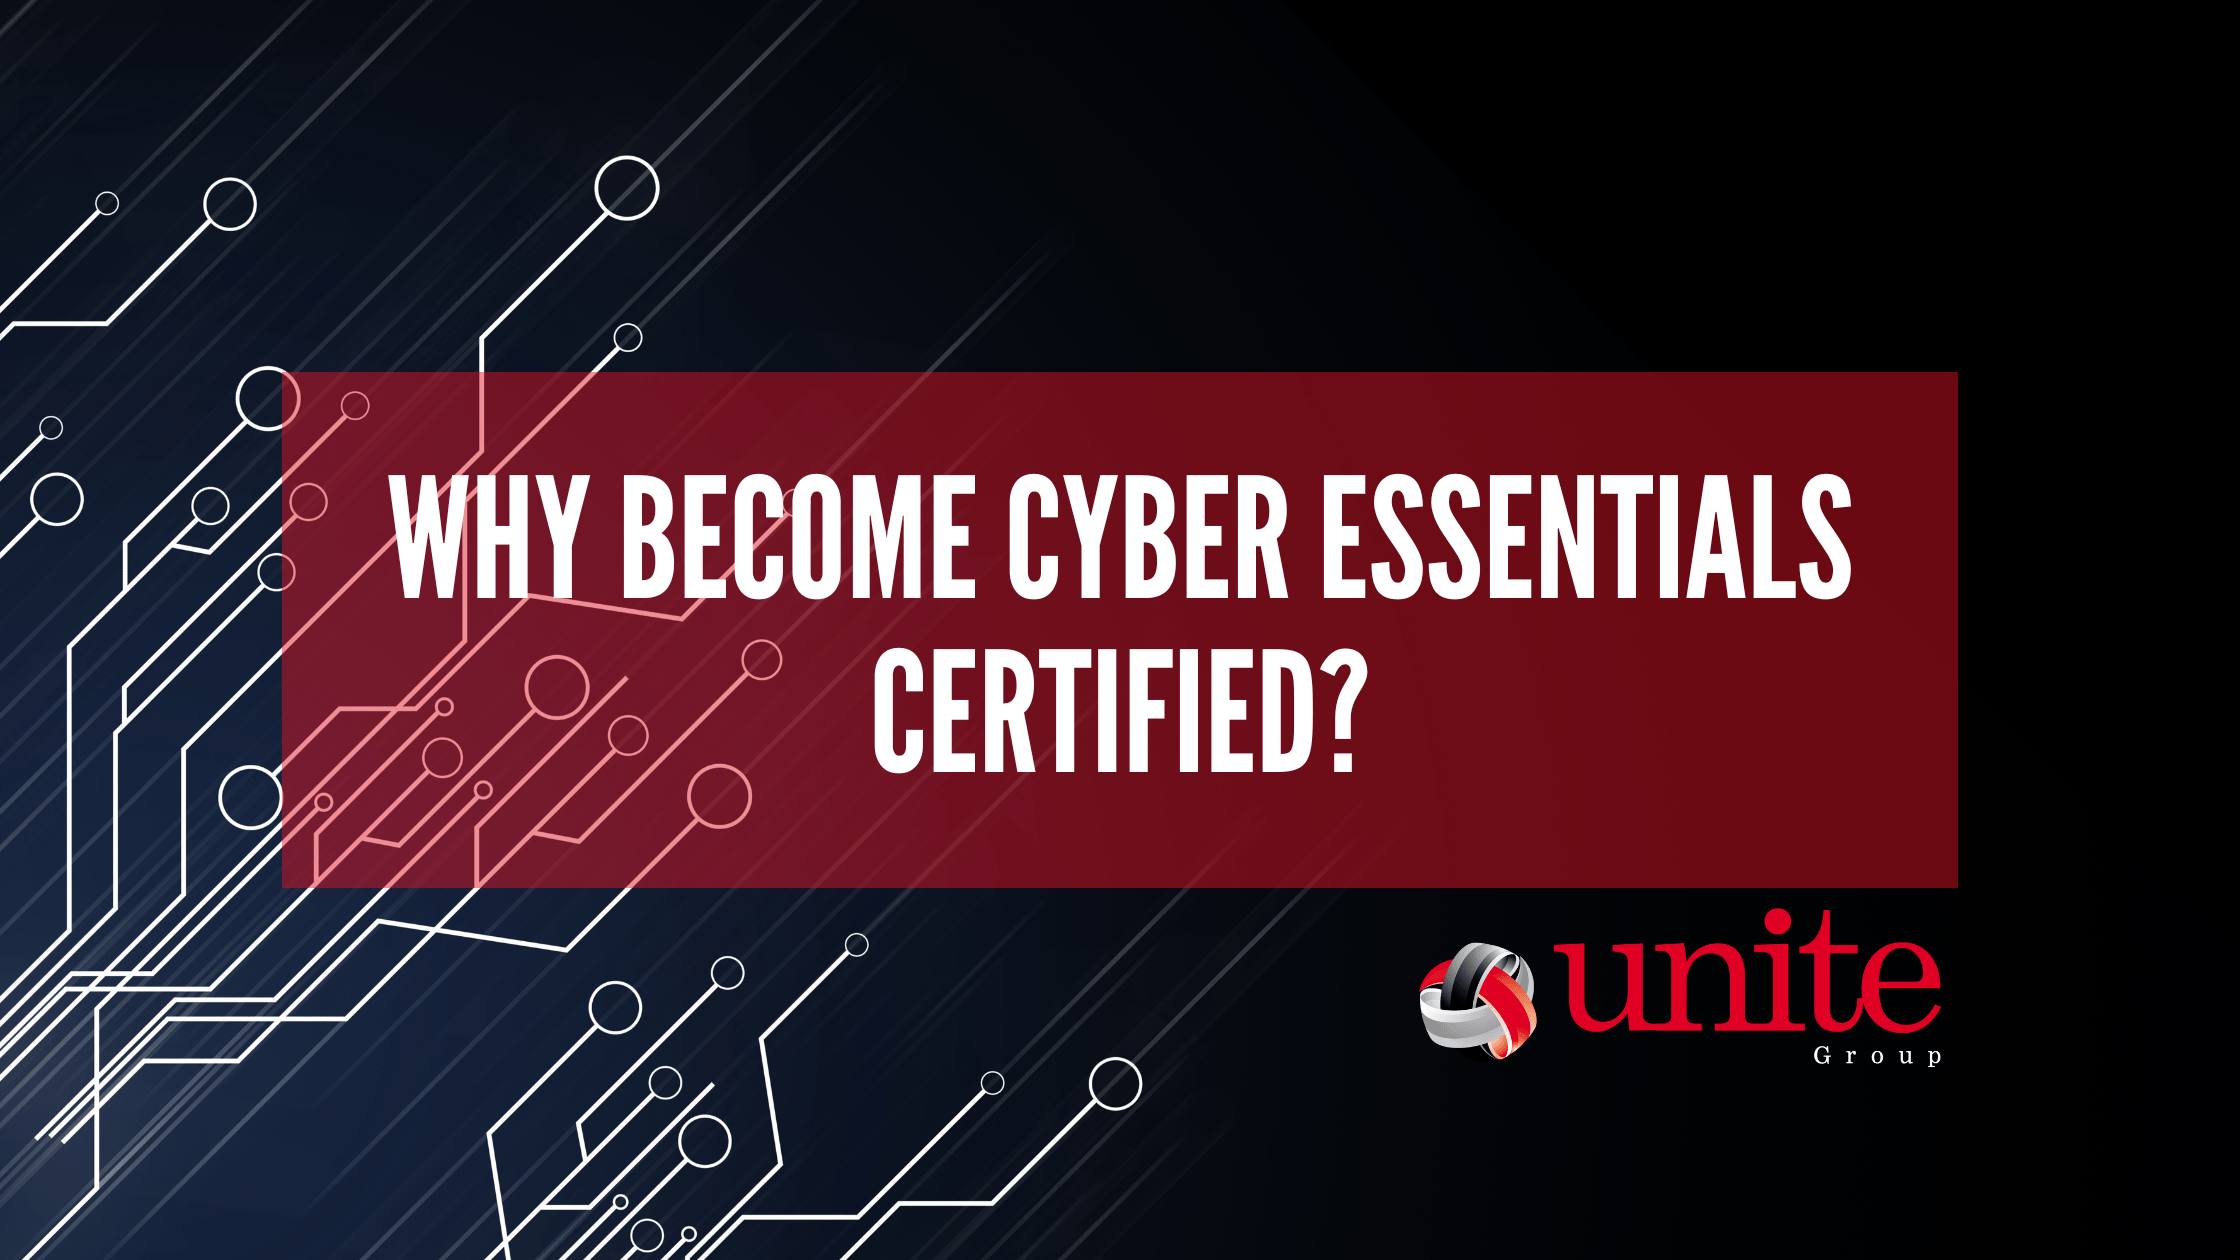 Why Become Cyber Essentials Certified The Unite Group